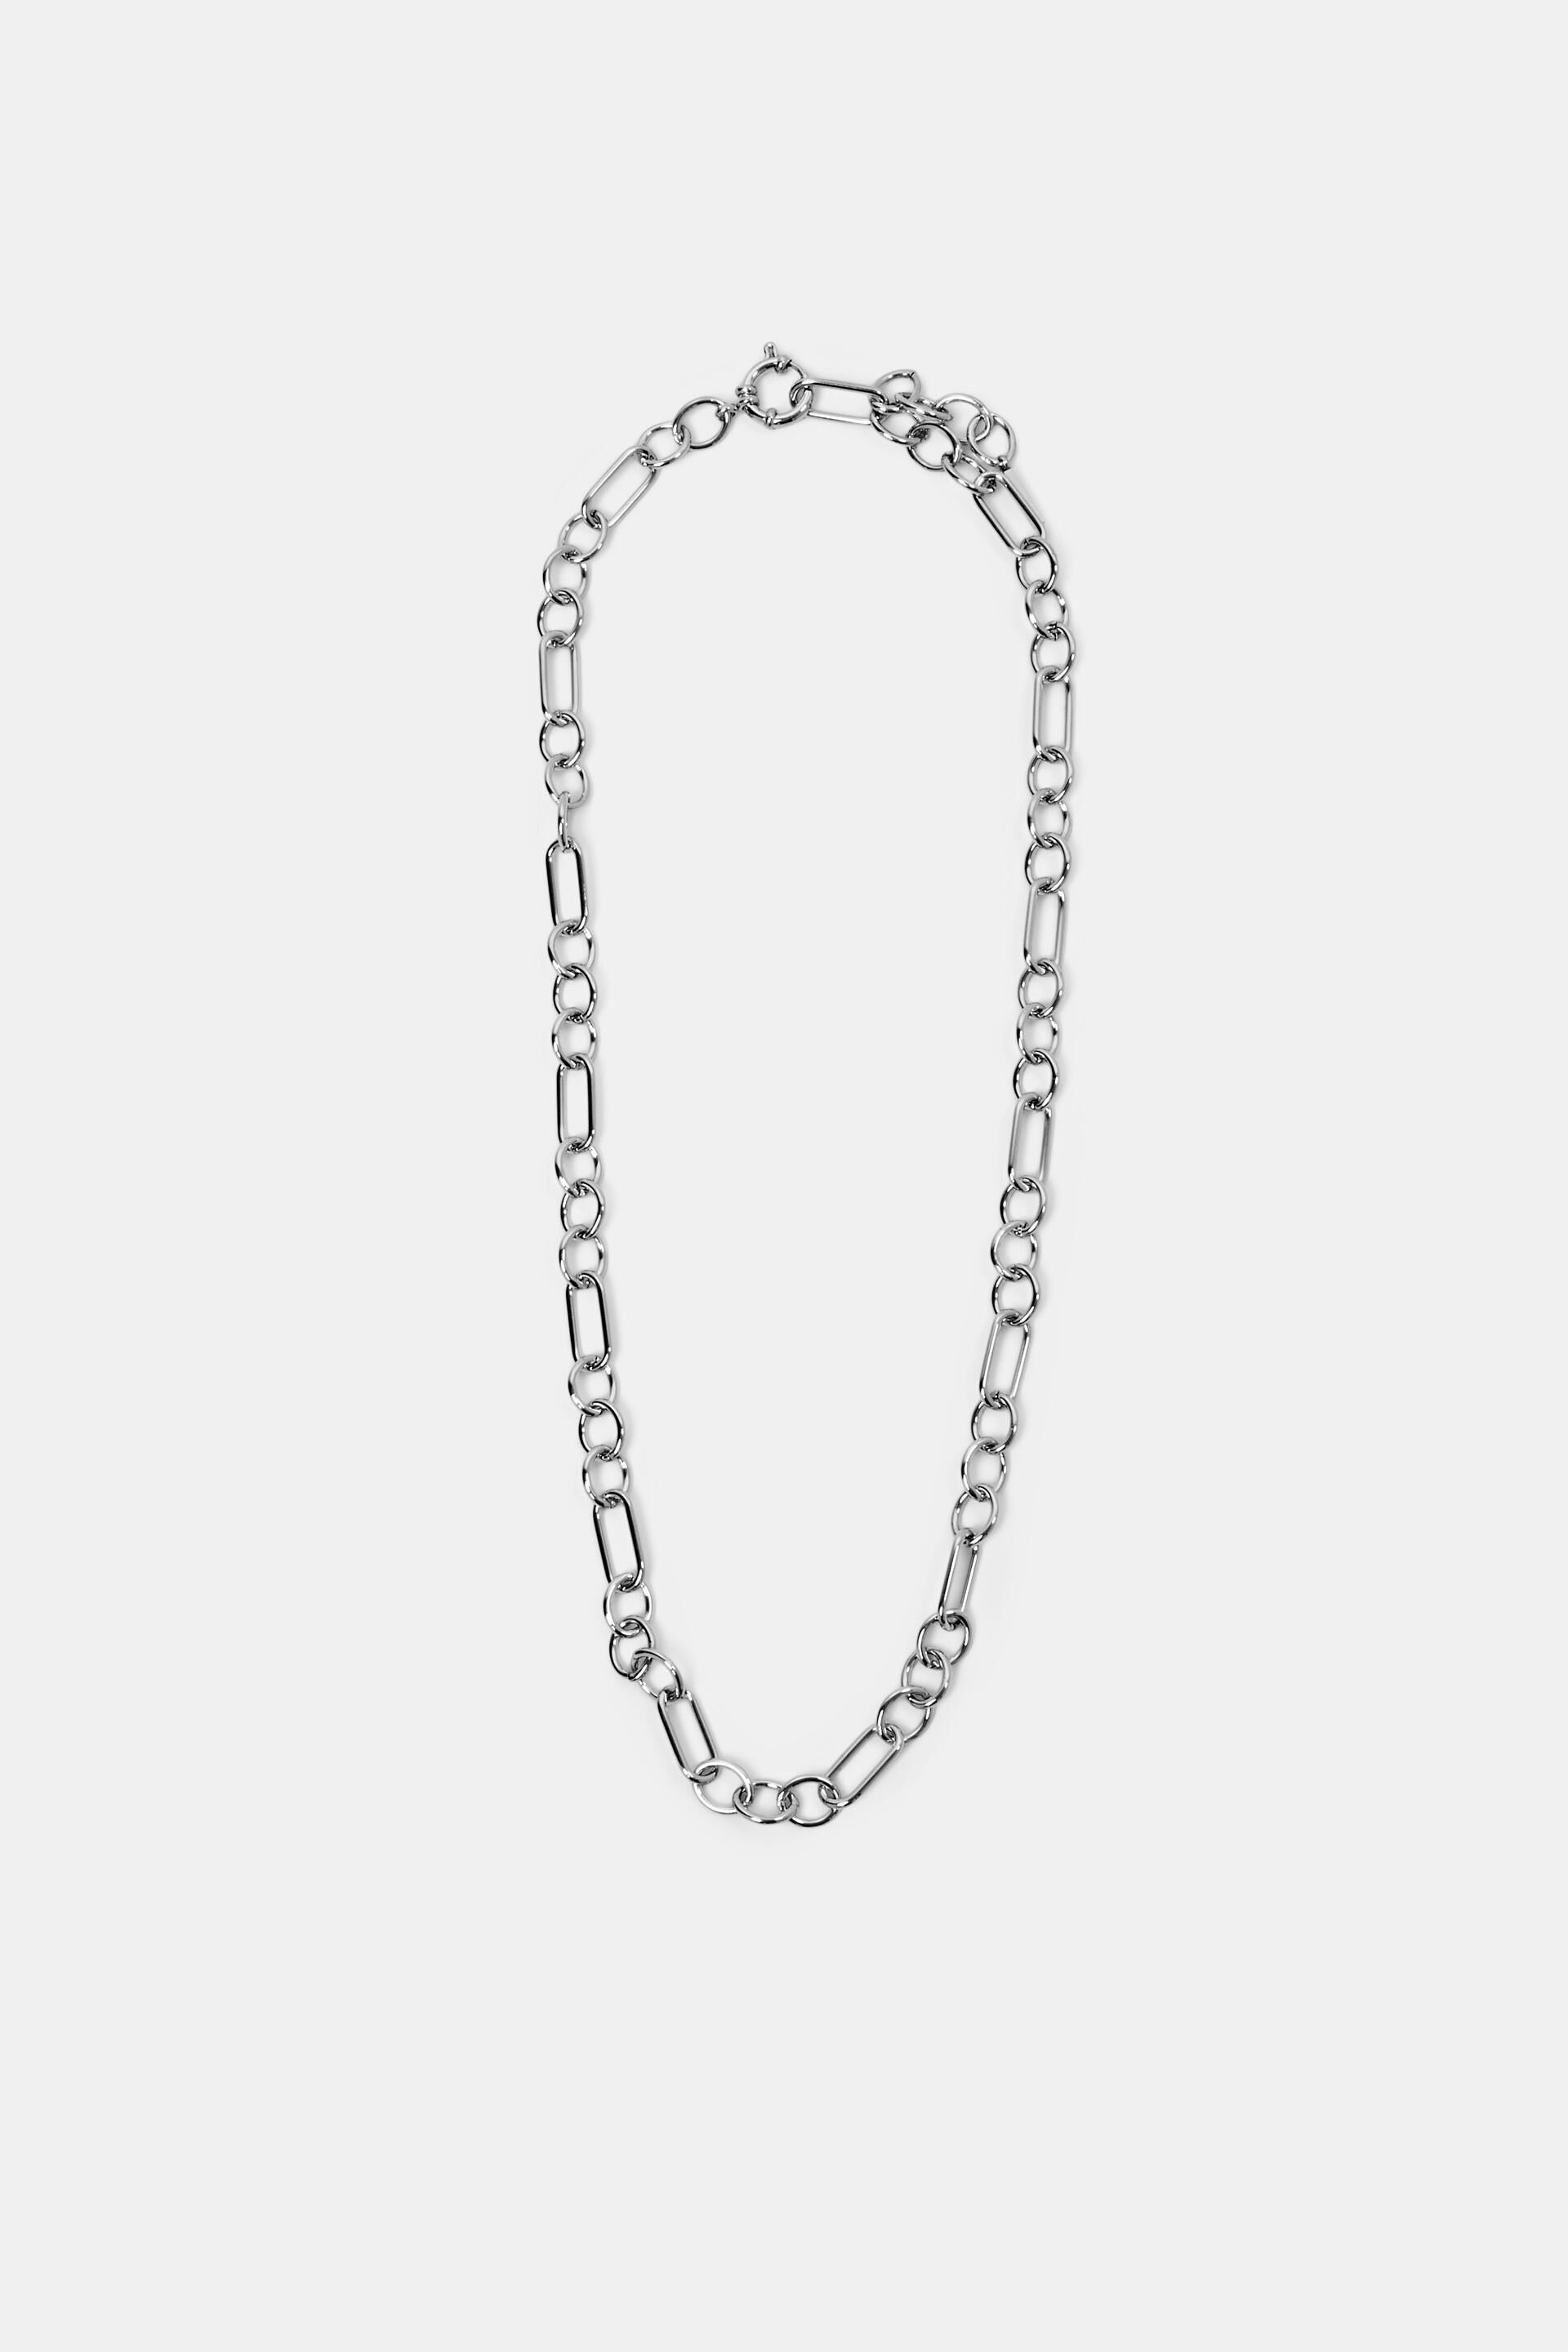 Esprit steel necklace, stainless Chain